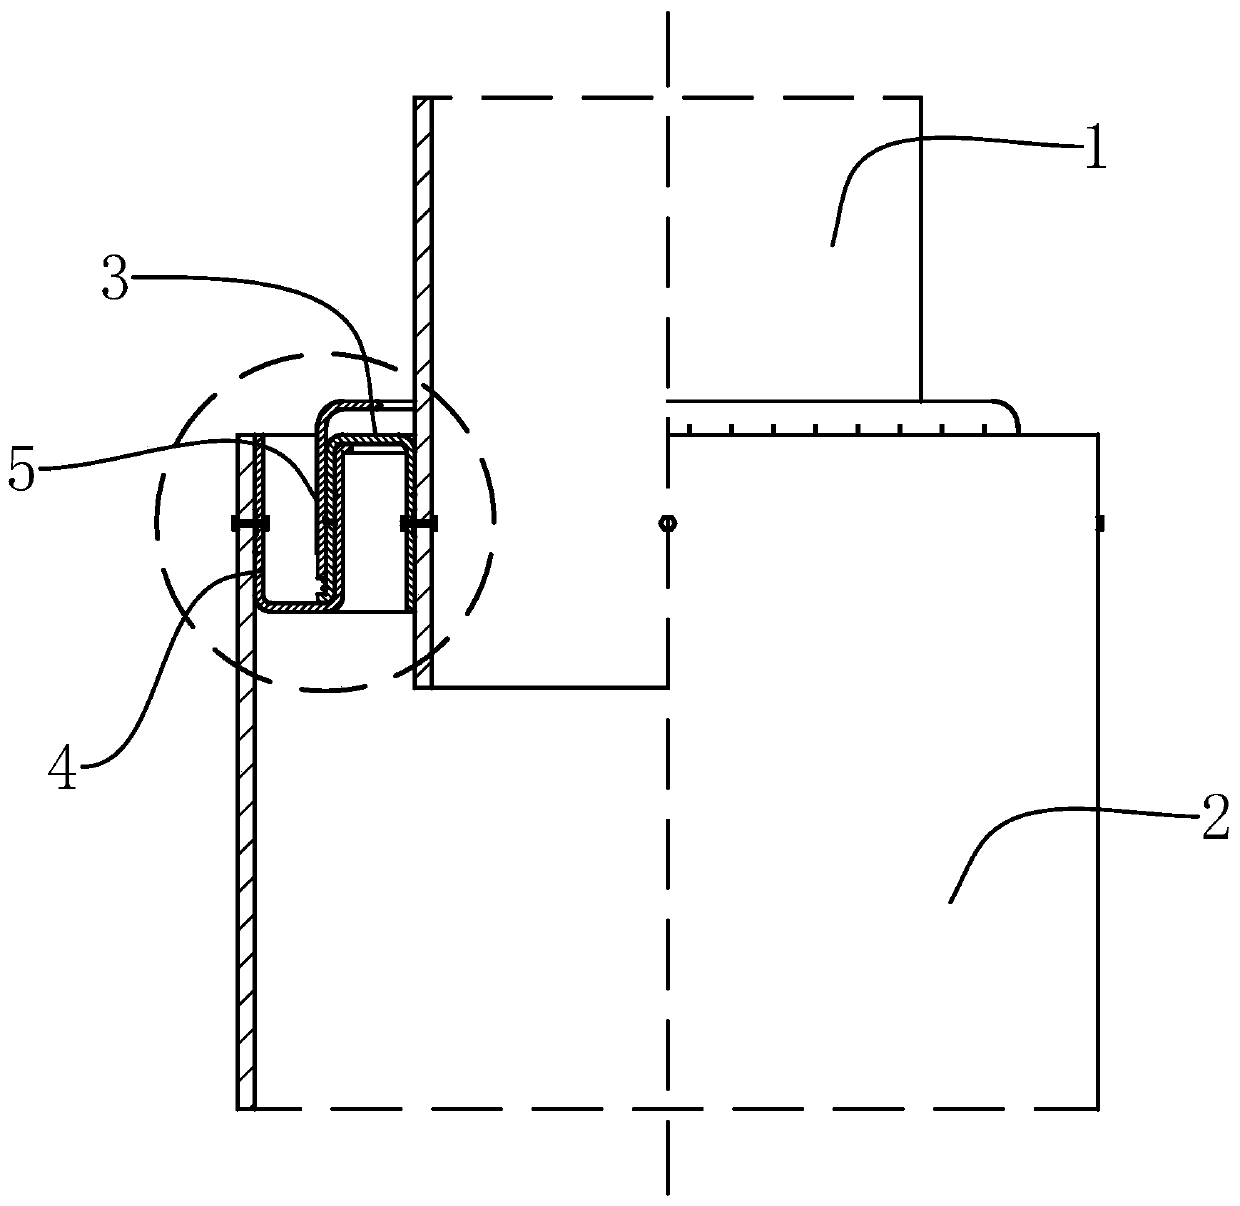 A kind of pipeline quick connection structure and its assembly and disassembly method